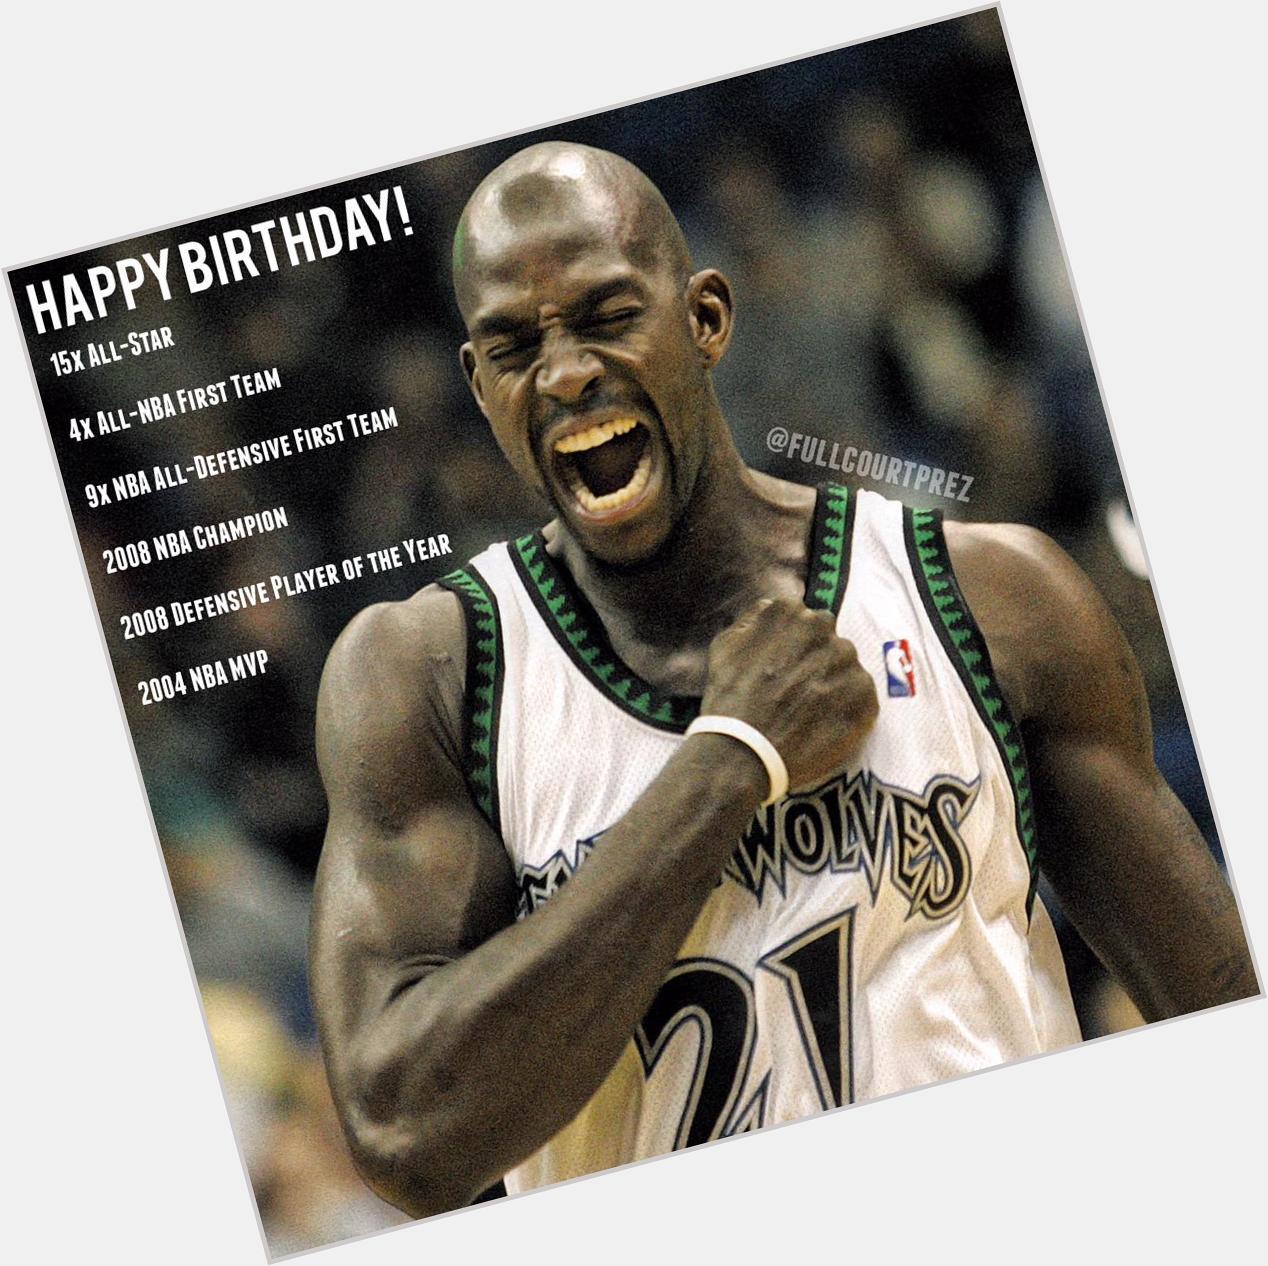 Happy 39th birthday to one of the best power forwards to ever play the game, Kevin Garnett! 